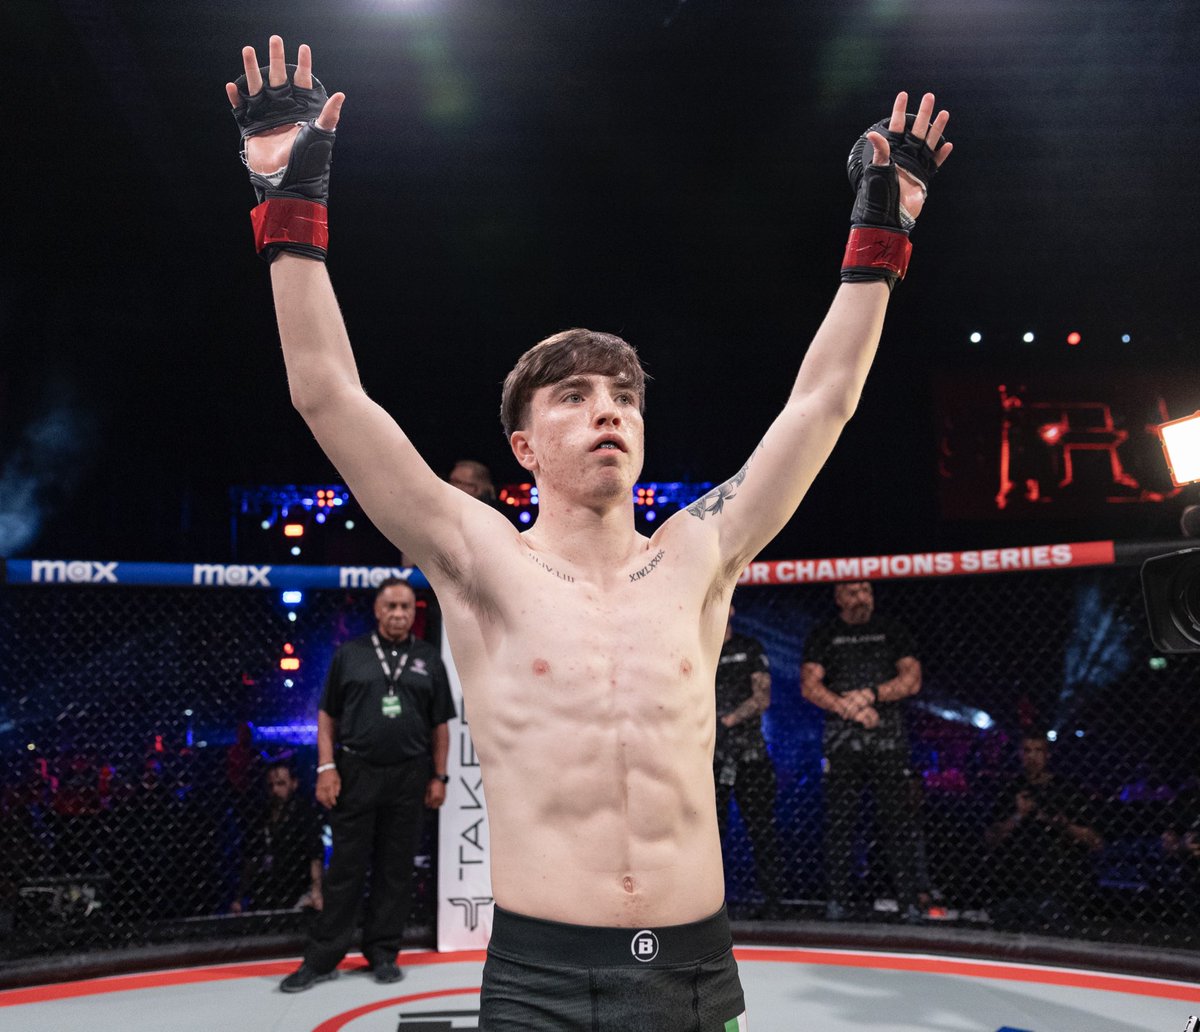 Per sources, Irish amateur Nate “The Great” Kelly is set to feature on the Bellator Champions Series card on 22nd June in Dublin. The SBG Ireland flyweight is slated to face Myalo Martial Arts’ Paul Nolan. A step up in competition after consecutive PFL/Bellator finishes.